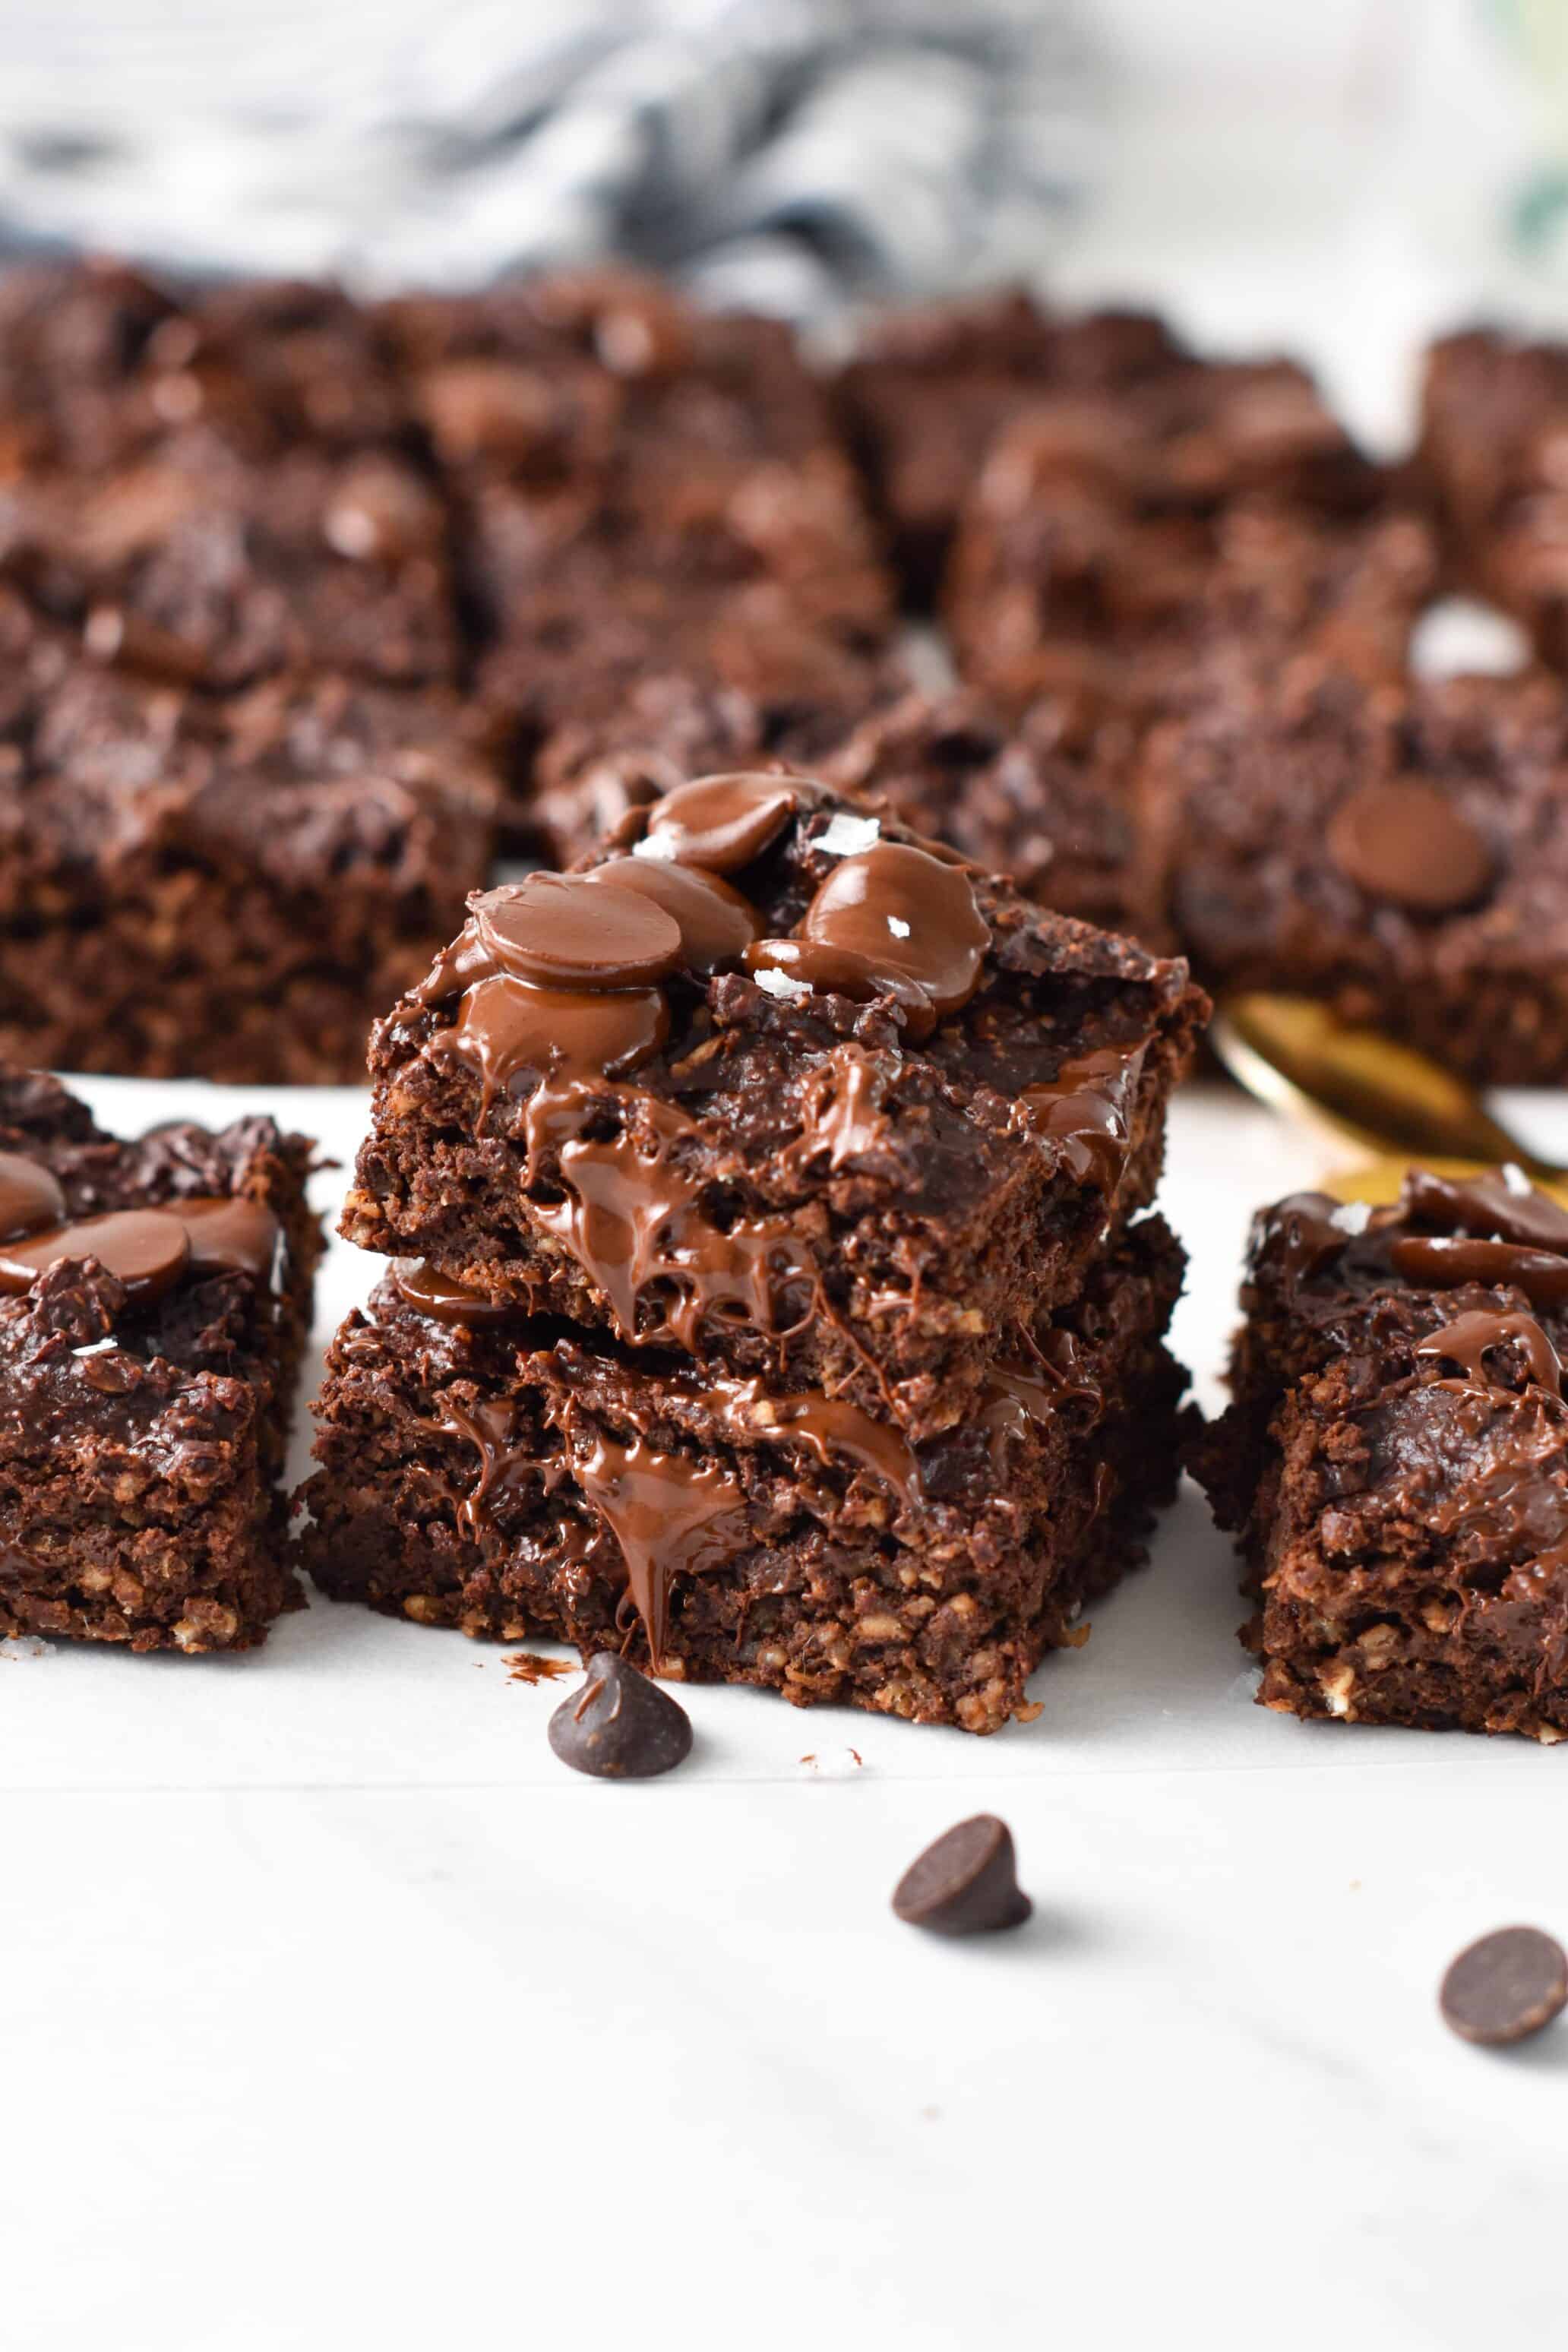 These Plant-Based Yogurt Brownies are oil-free brownies simply made with yogurt instead of oil or plant-based butter. Plus, they are also refined sugar-free, and packed with whole grains from oats.